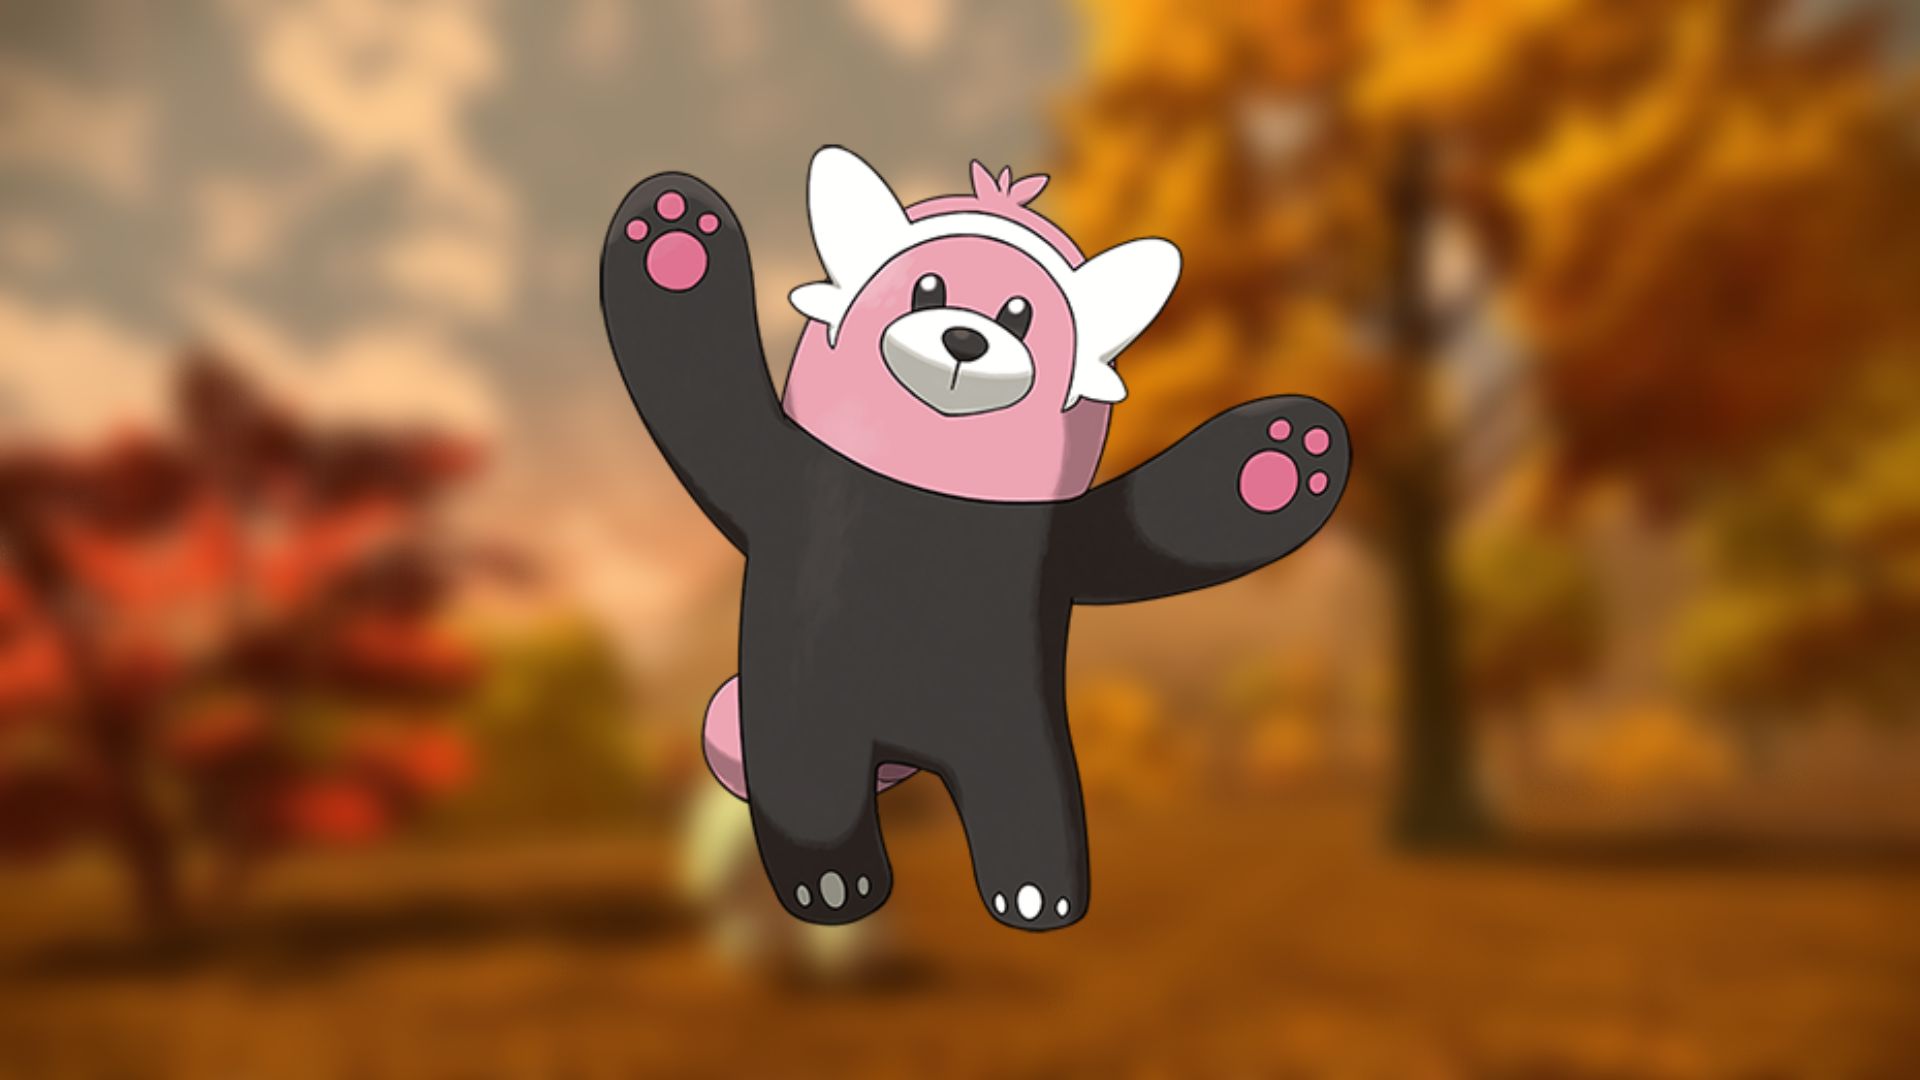 Custom image of Bewear waving on an autumnal background for cutest Pokemon guide